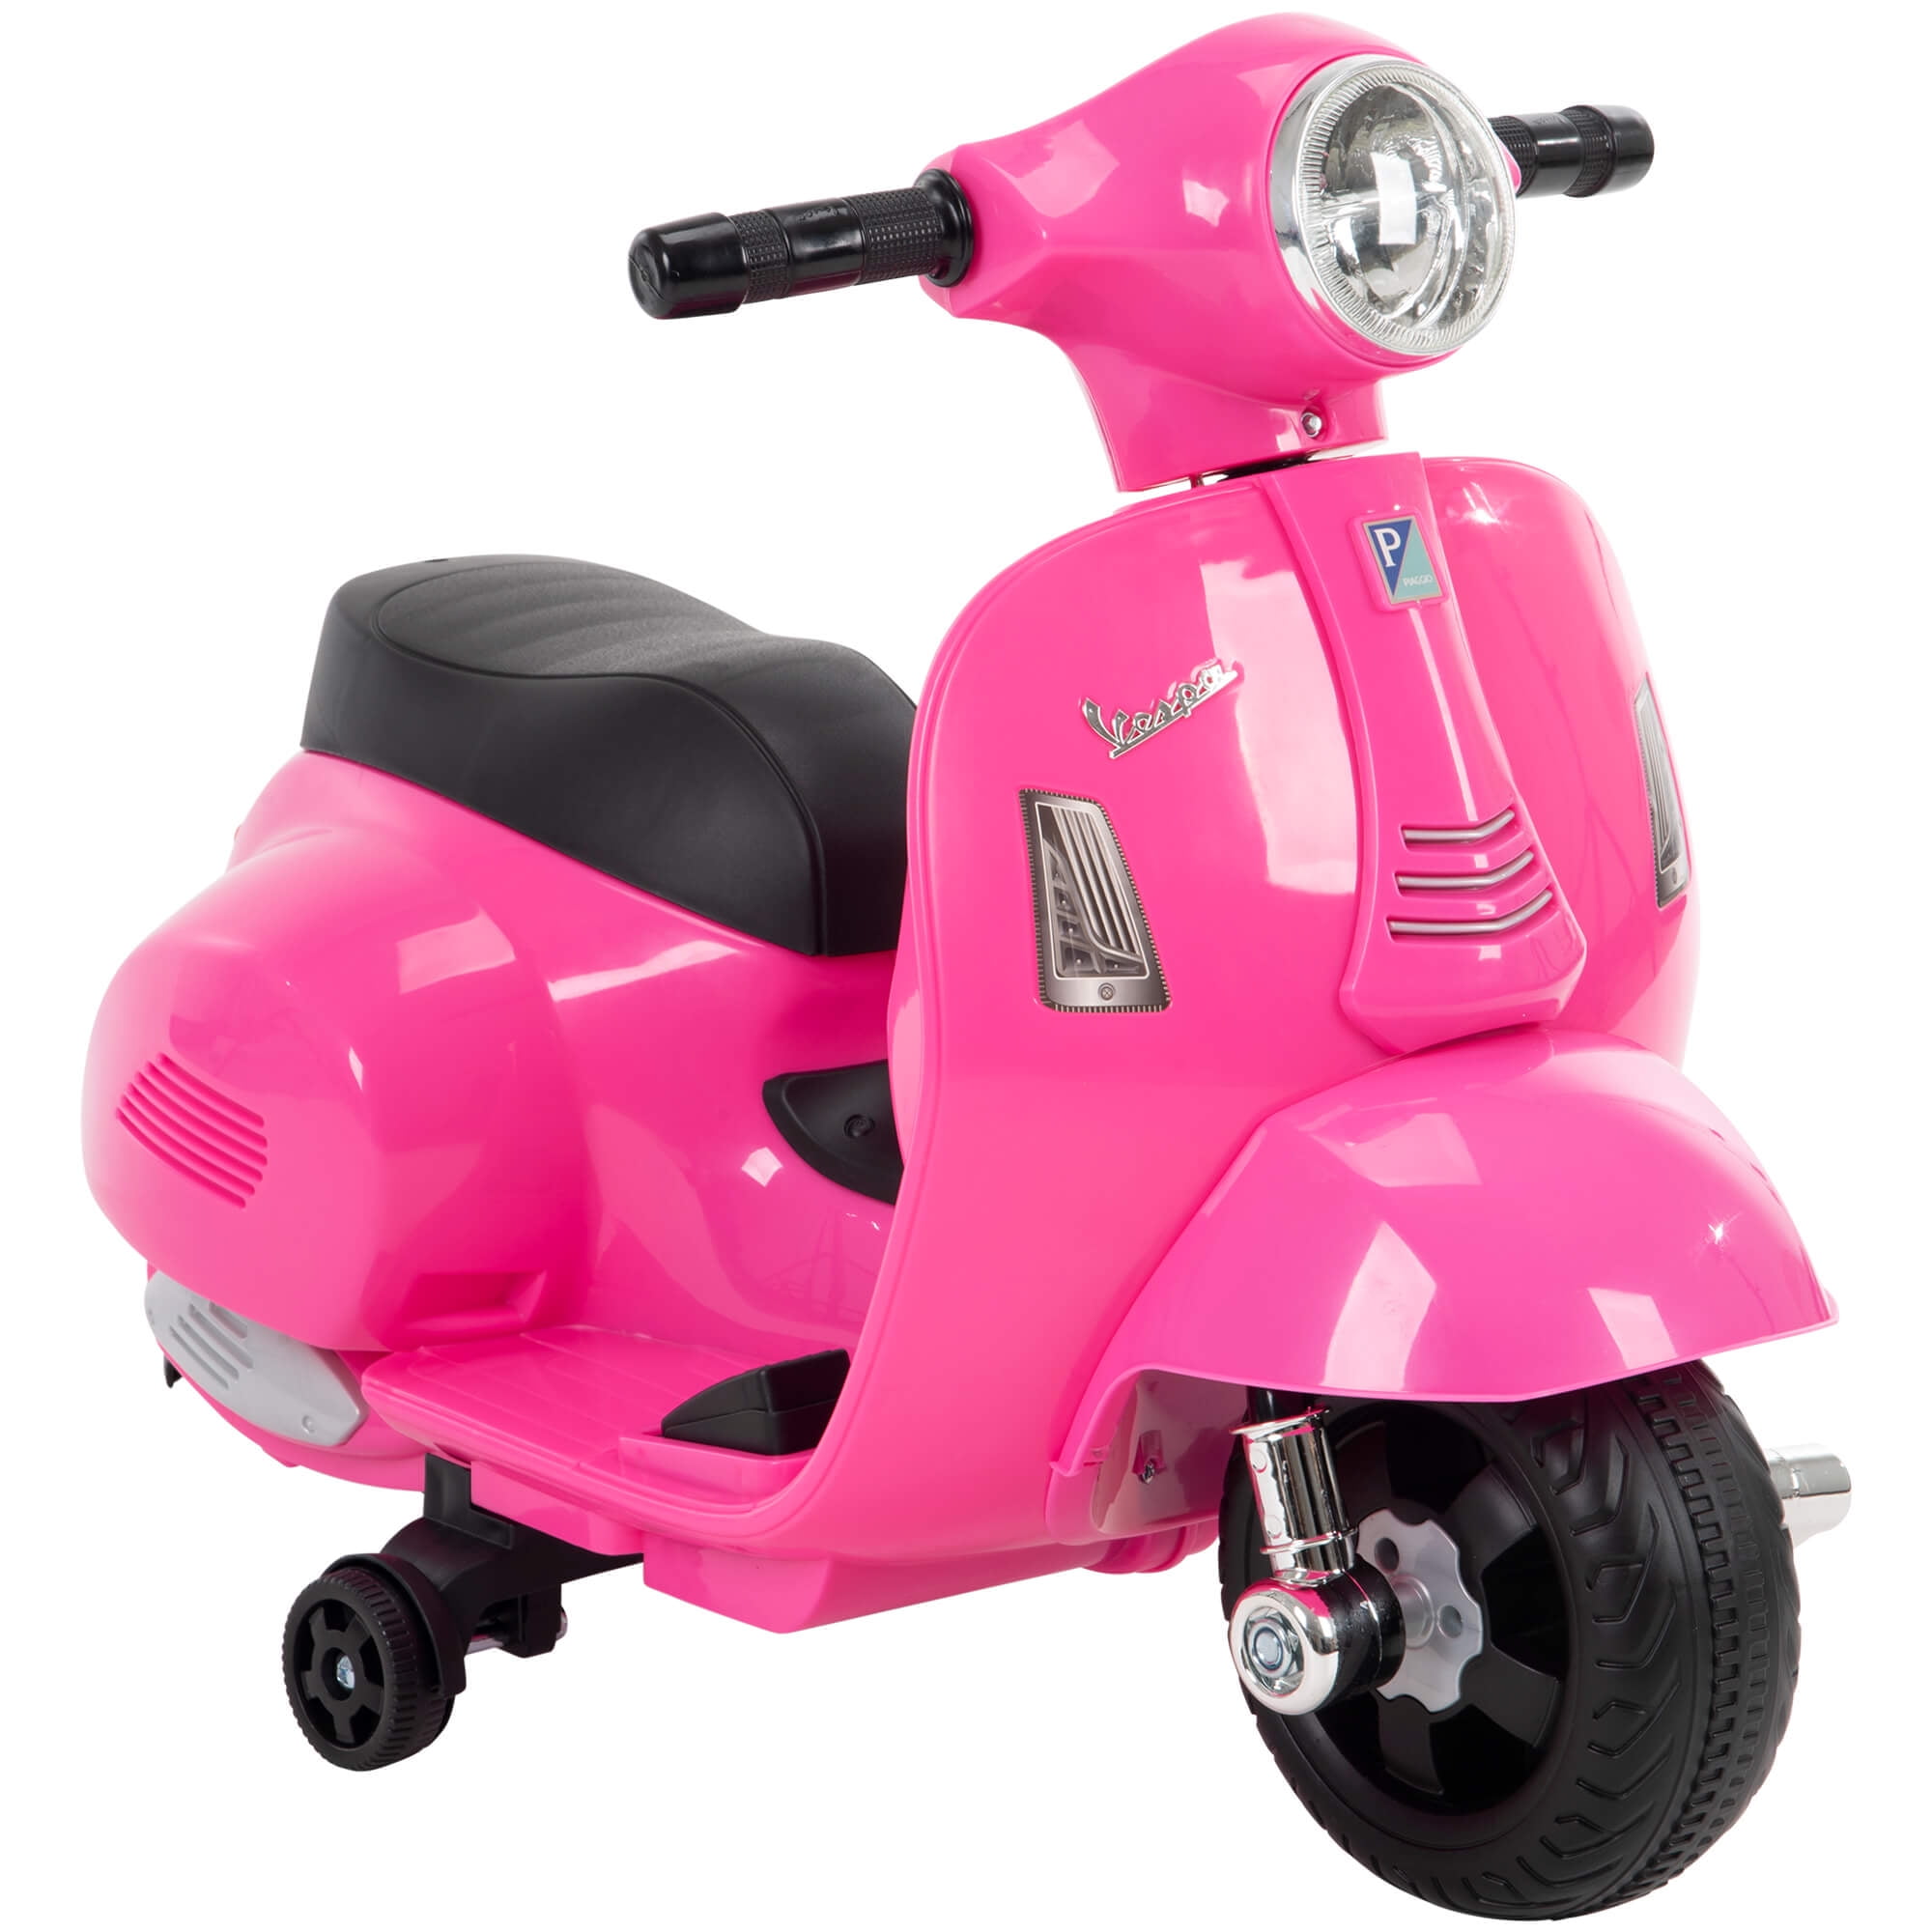 Huffy 6V Vespa Ride-On Electric Scooter for Kids, Pink 